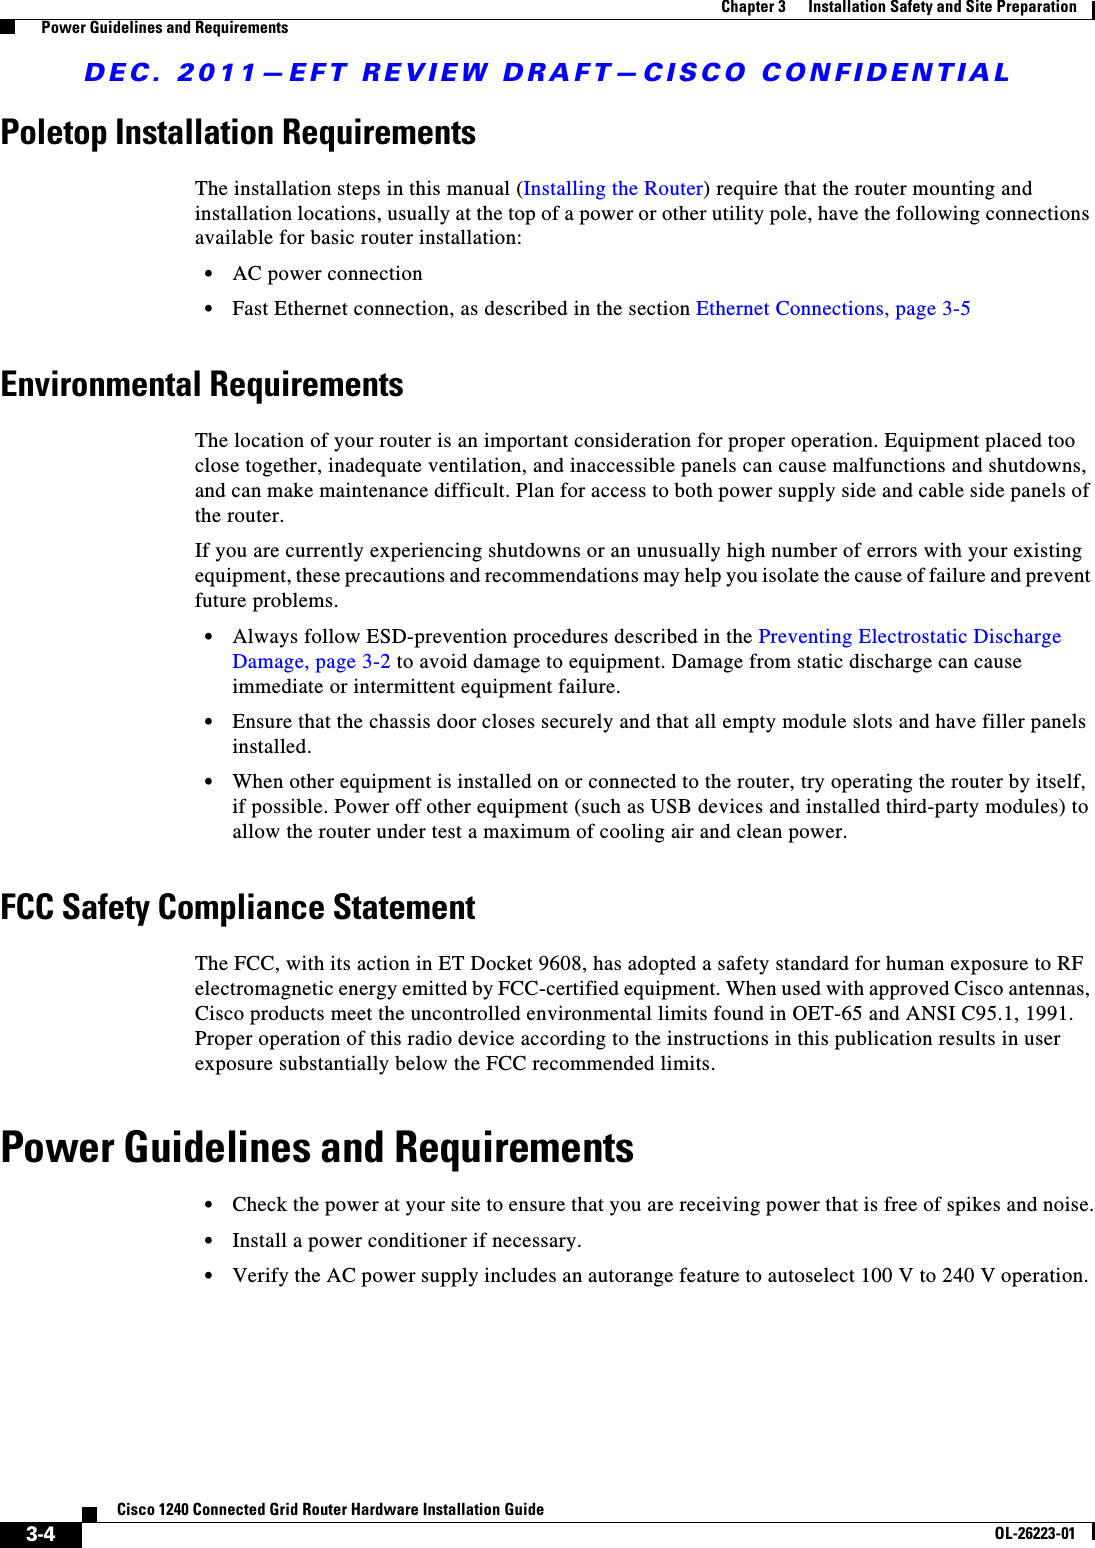 DEC. 2011—EFT REVIEW DRAFT—CISCO CONFIDENTIAL3-4Cisco 1240 Connected Grid Router Hardware Installation GuideOL-26223-01Chapter 3      Installation Safety and Site Preparation  Power Guidelines and RequirementsPoletop Installation RequirementsThe installation steps in this manual (Installing the Router) require that the router mounting and installation locations, usually at the top of a power or other utility pole, have the following connections available for basic router installation:  • AC power connection  • Fast Ethernet connection, as described in the section Ethernet Connections, page 3-5Environmental RequirementsThe location of your router is an important consideration for proper operation. Equipment placed too close together, inadequate ventilation, and inaccessible panels can cause malfunctions and shutdowns, and can make maintenance difficult. Plan for access to both power supply side and cable side panels of the router.If you are currently experiencing shutdowns or an unusually high number of errors with your existing equipment, these precautions and recommendations may help you isolate the cause of failure and prevent future problems.  • Always follow ESD-prevention procedures described in the Preventing Electrostatic Discharge Damage, page 3-2 to avoid damage to equipment. Damage from static discharge can cause immediate or intermittent equipment failure.  • Ensure that the chassis door closes securely and that all empty module slots and have filler panels installed.  • When other equipment is installed on or connected to the router, try operating the router by itself, if possible. Power off other equipment (such as USB devices and installed third-party modules) to allow the router under test a maximum of cooling air and clean power.FCC Safety Compliance StatementThe FCC, with its action in ET Docket 9608, has adopted a safety standard for human exposure to RF electromagnetic energy emitted by FCC-certified equipment. When used with approved Cisco antennas, Cisco products meet the uncontrolled environmental limits found in OET-65 and ANSI C95.1, 1991. Proper operation of this radio device according to the instructions in this publication results in user exposure substantially below the FCC recommended limits.Power Guidelines and Requirements  • Check the power at your site to ensure that you are receiving power that is free of spikes and noise.  • Install a power conditioner if necessary.  • Verify the AC power supply includes an autorange feature to autoselect 100 V to 240 V operation. 